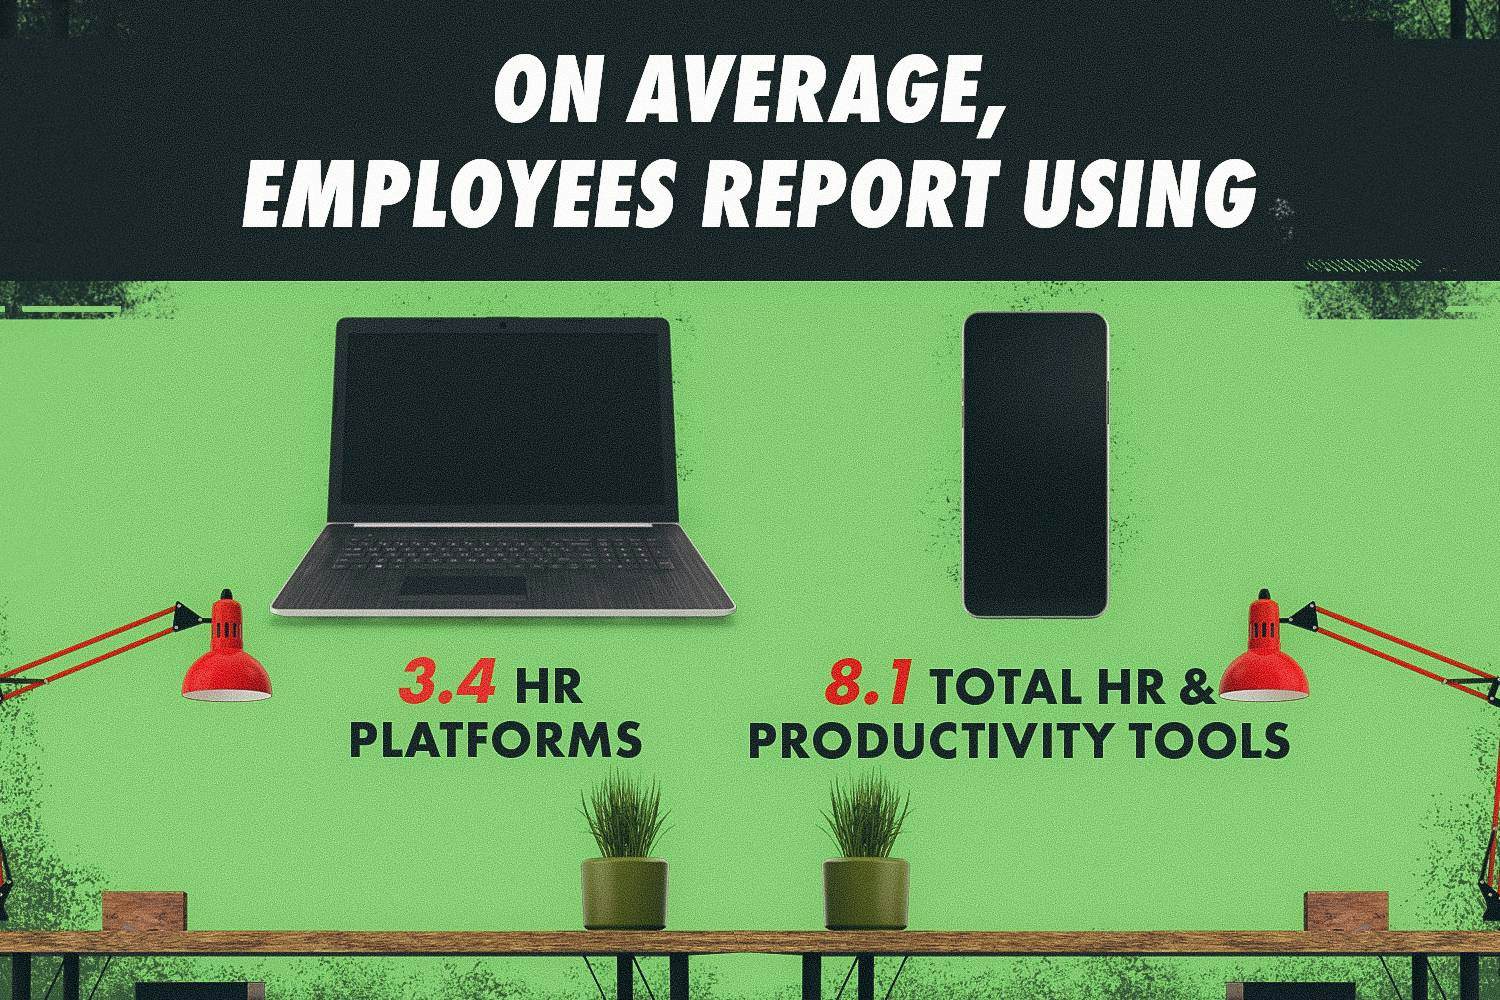 Employees report using 3.4 HR platforms and 8.1 total HR and productivity tools